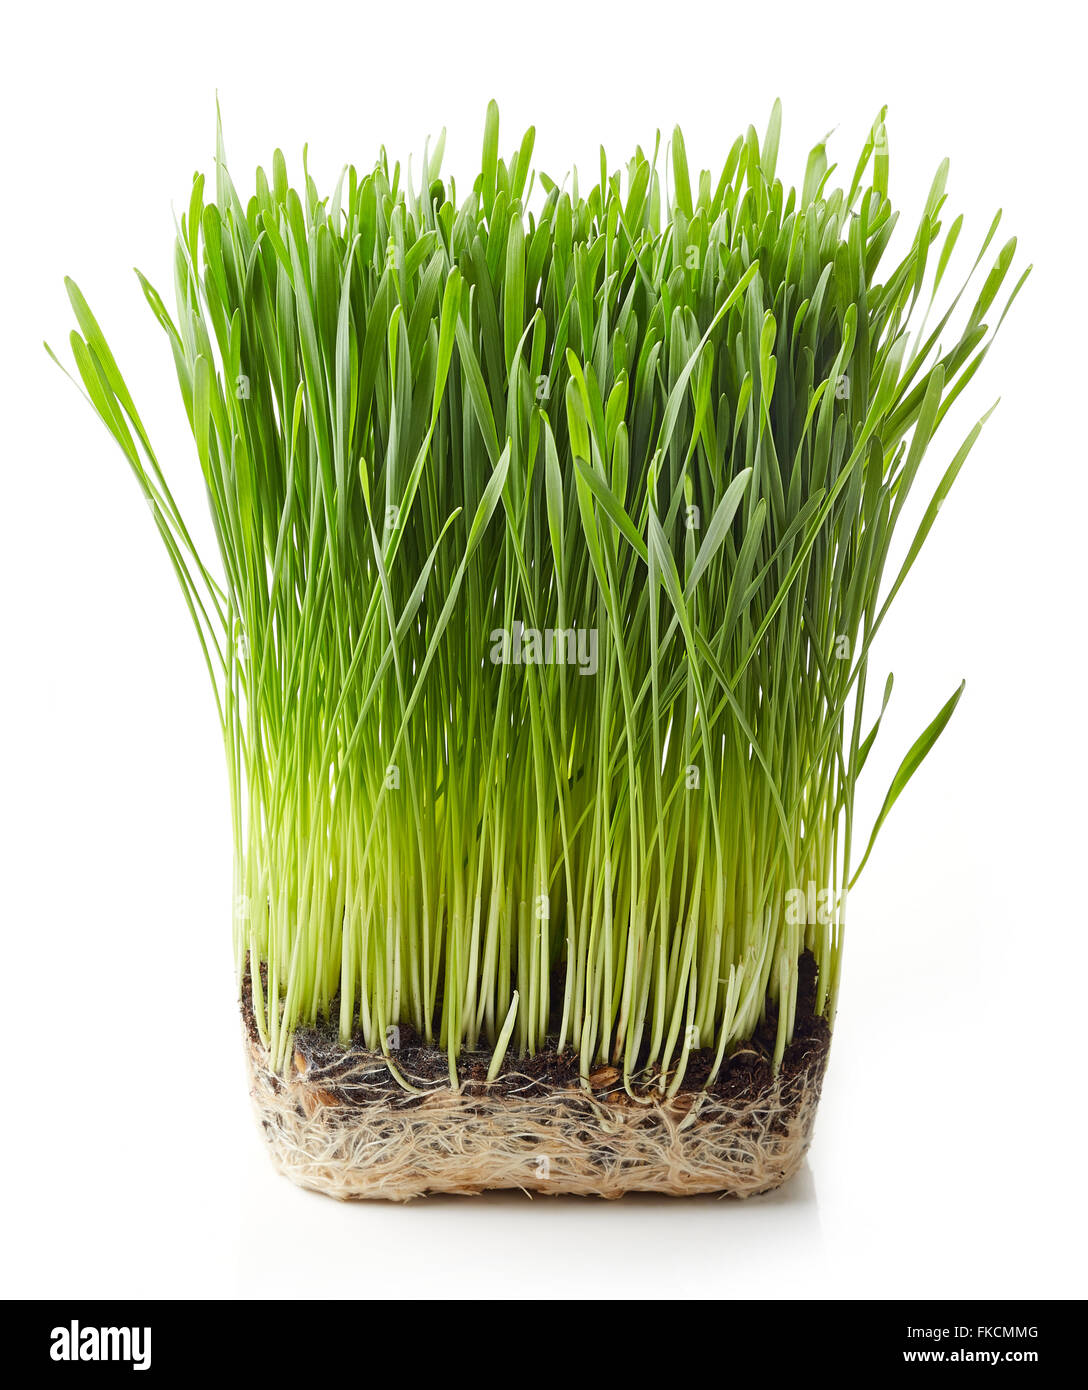 Young wheat grass isolated on white background Stock Photo